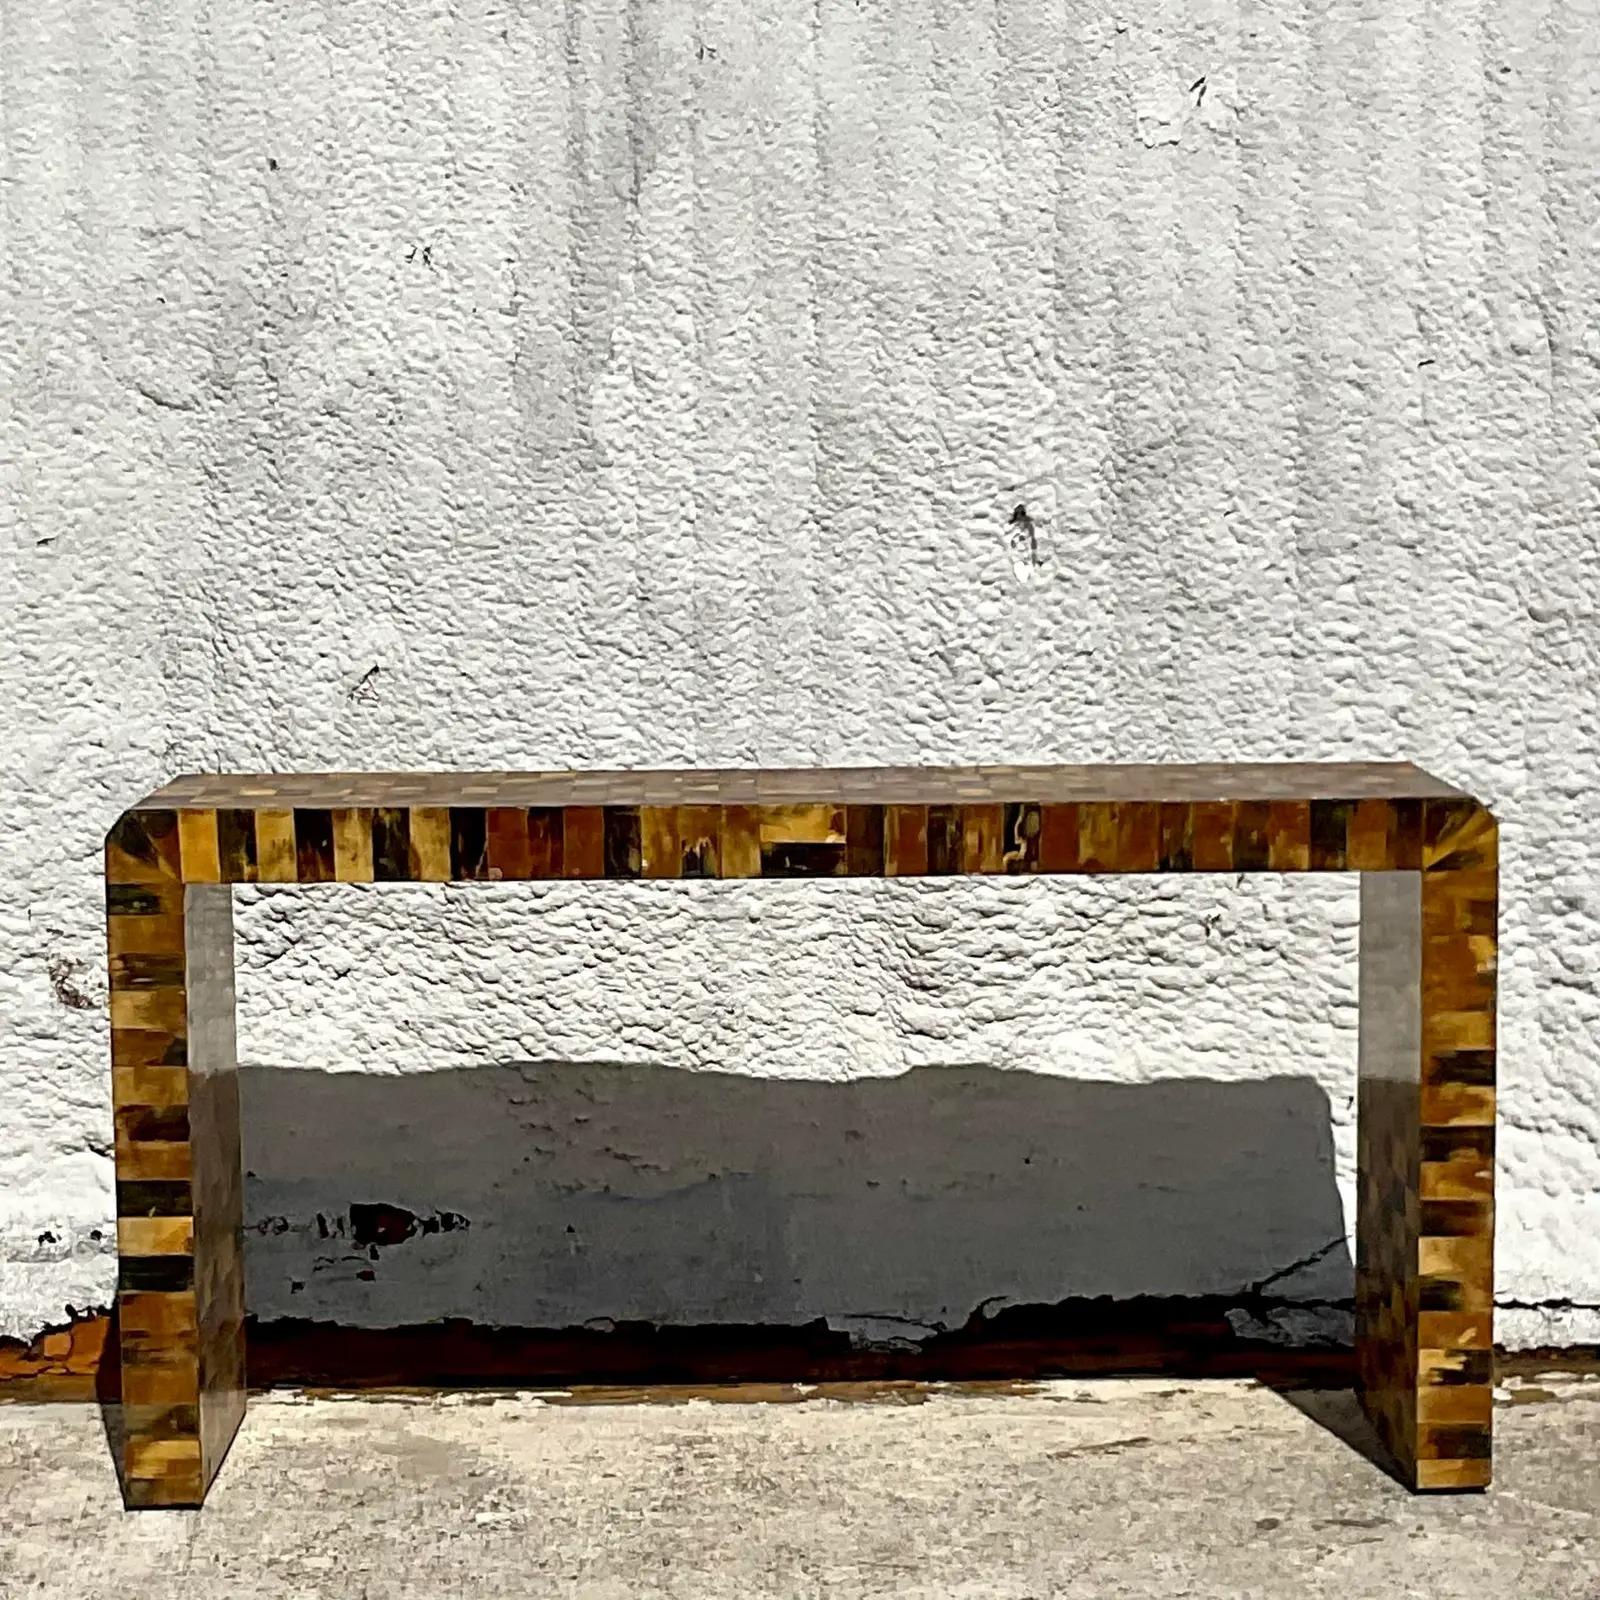 An exceptional vintage Boho console table. A chic tessellated horn with a warm patina from time. A a clean and simple design with a luxurious material. Acquired from a Palm Beach estate.

The table is in good vintage condition. Scuffs and